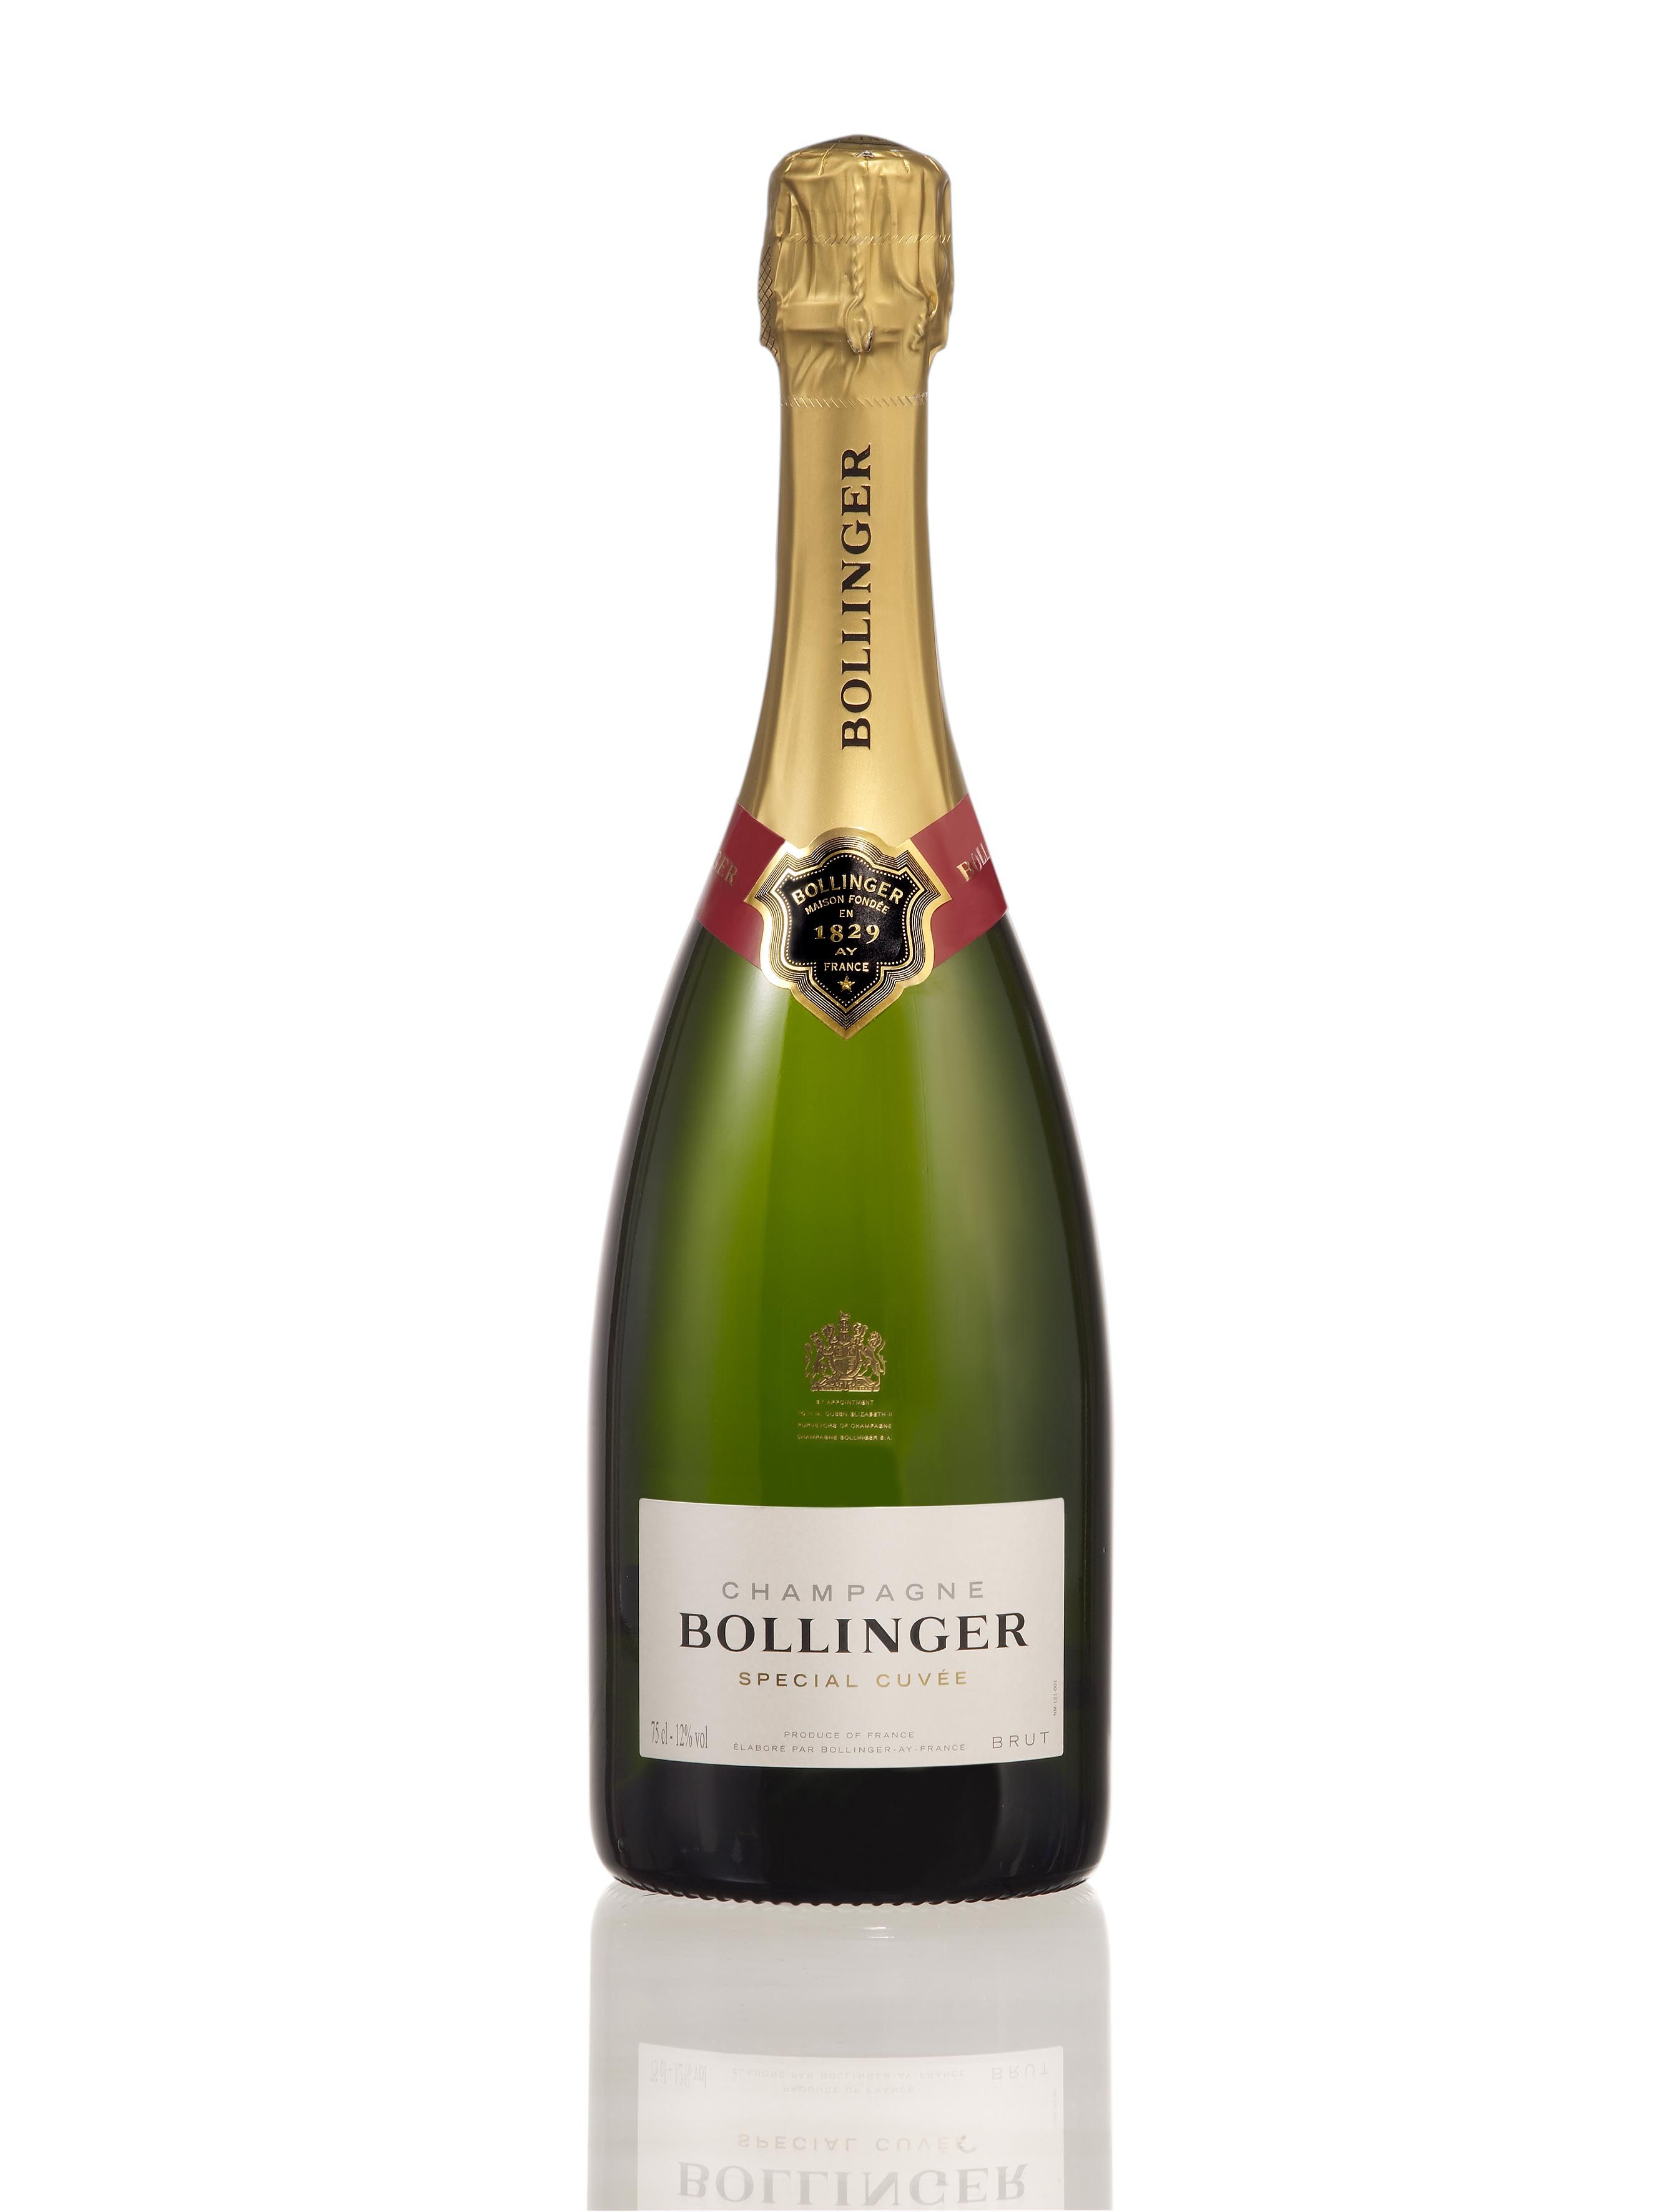 new bollinger bottle with narrower neck based on the shape of the ...